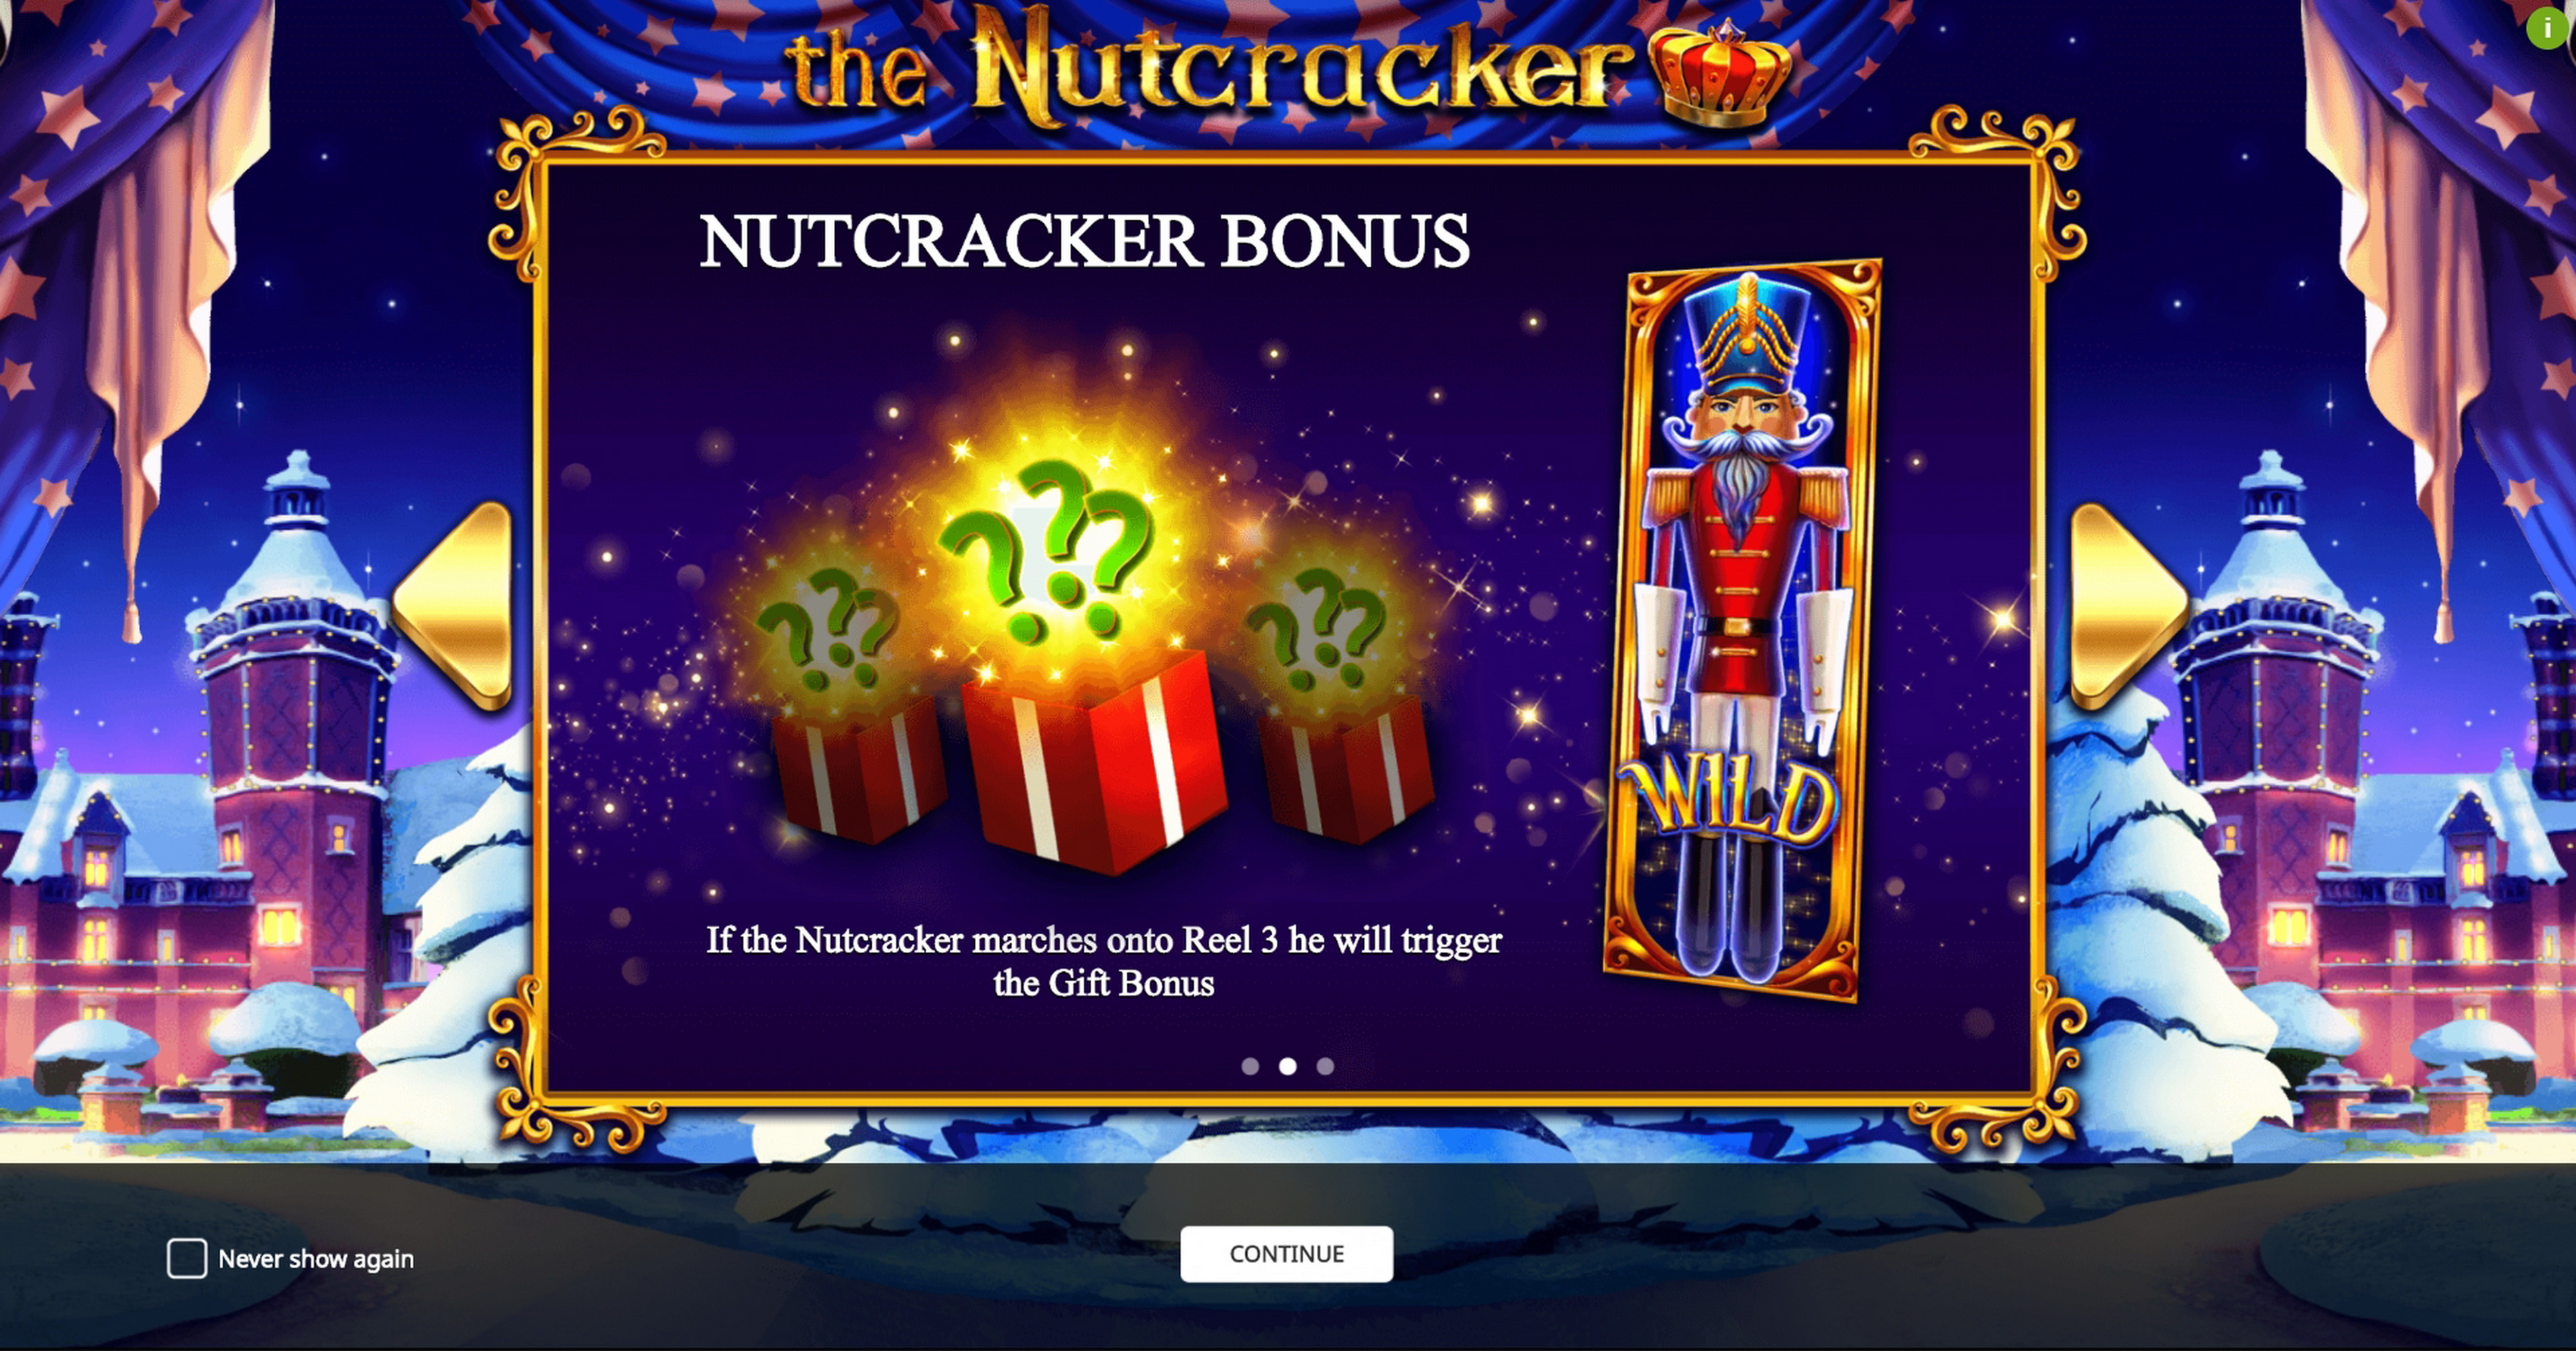 Play The Nutcracker Free Casino Slot Game by iSoftBet